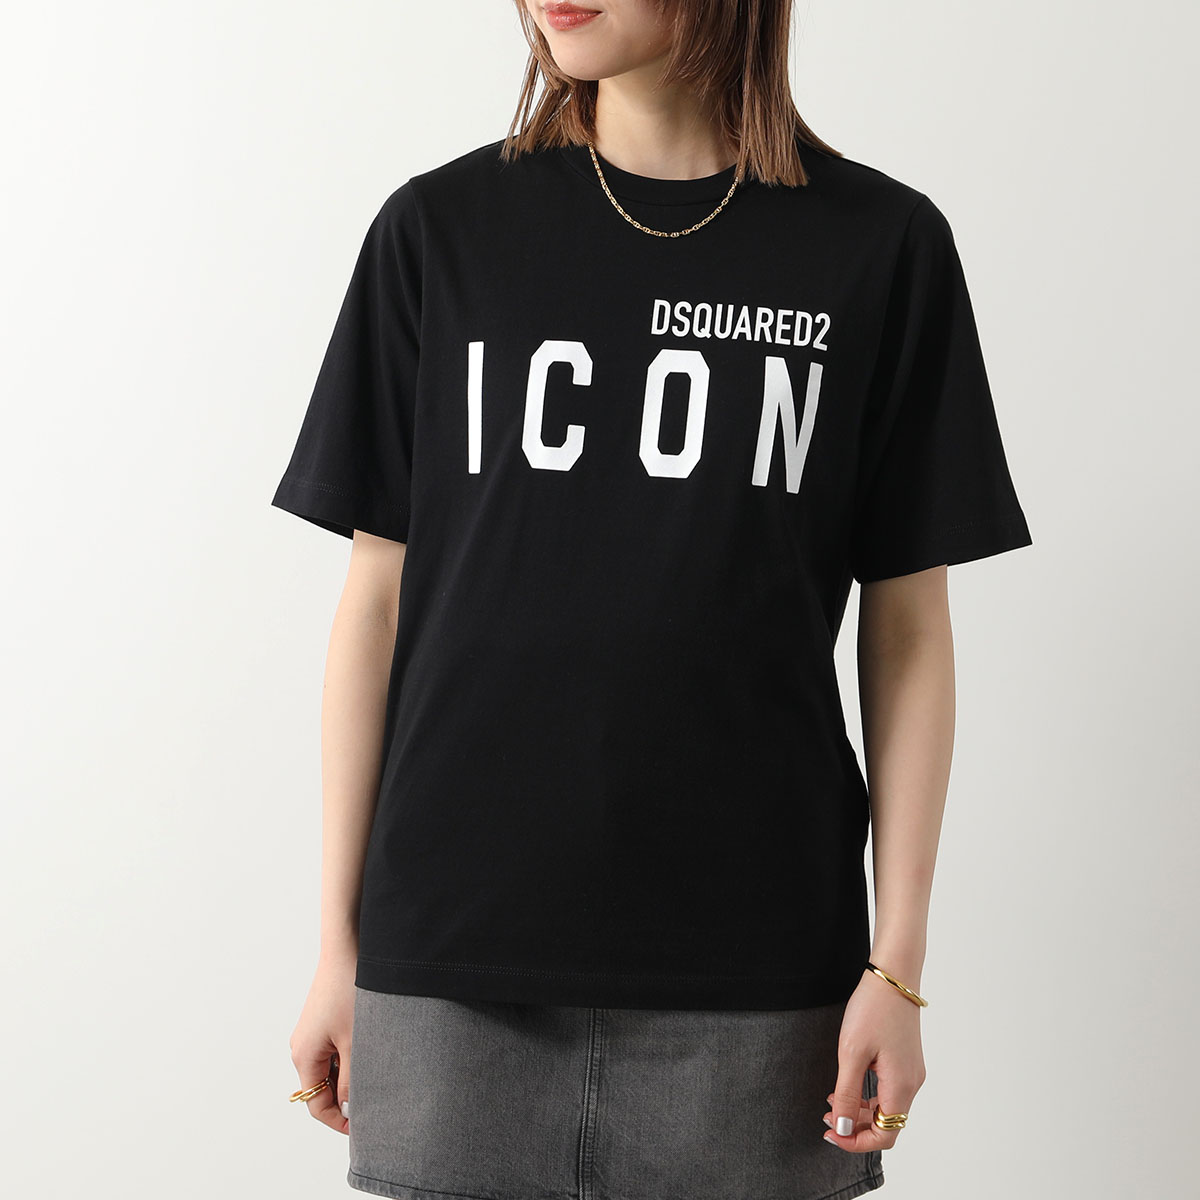 DSQUARED2 ディースクエアード Tシャツ ICON FOREVER EASY TEE S80GC0056 S24668 レディース 半袖 カットソー ロゴT カラー2色｜s-musee｜03